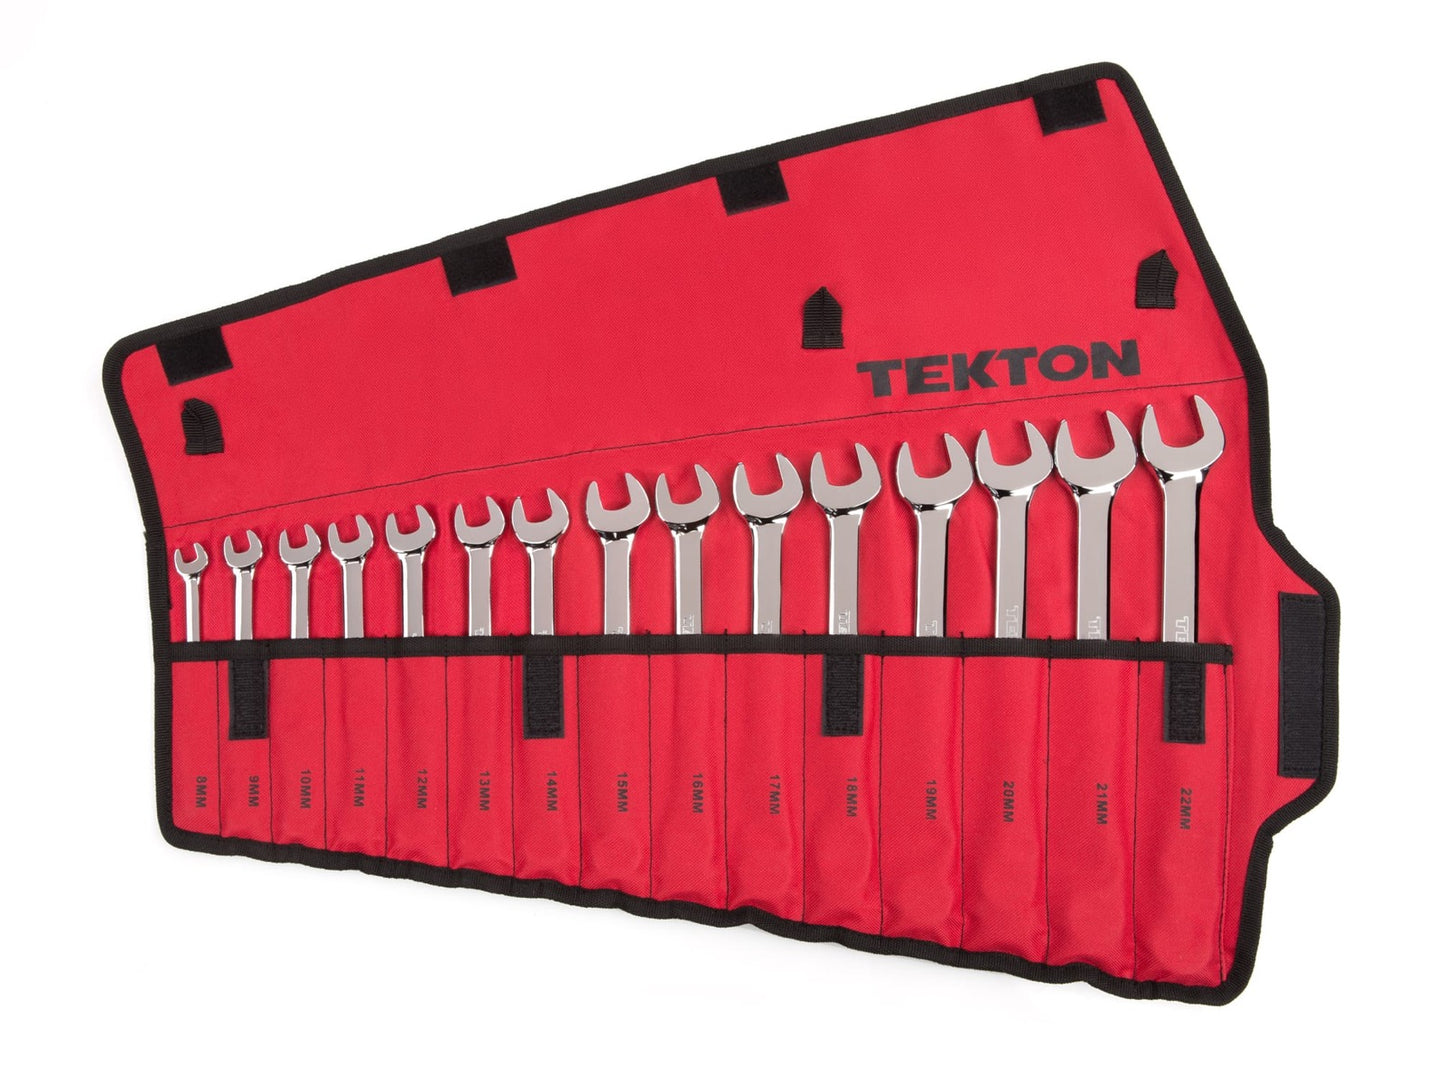 Tekton Combination Wrench Set, 15-Piece (8-22 mm) with Pouch (WRN03393)